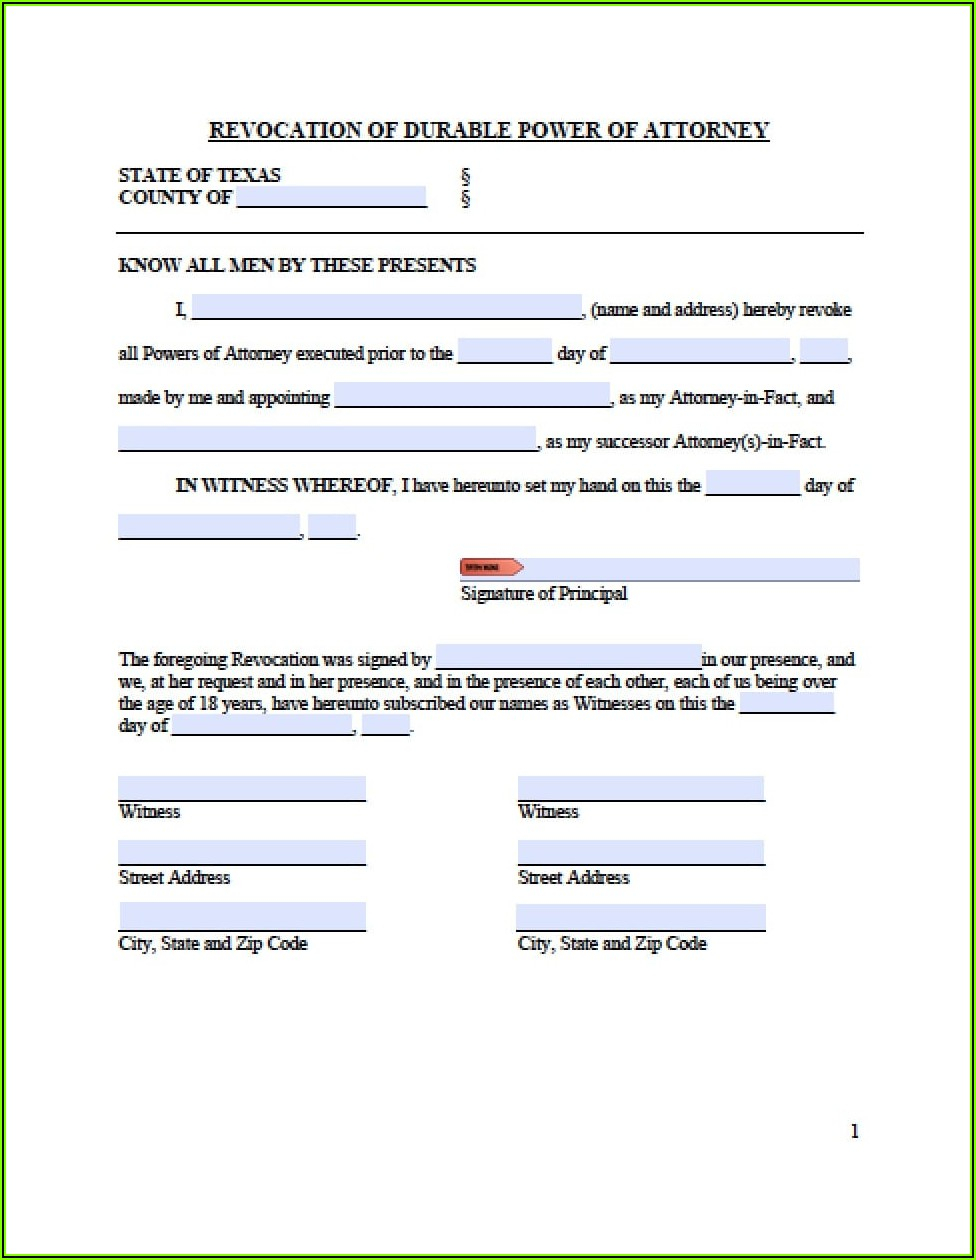 Relinquish Power Of Attorney Sample Letter Form Resume 